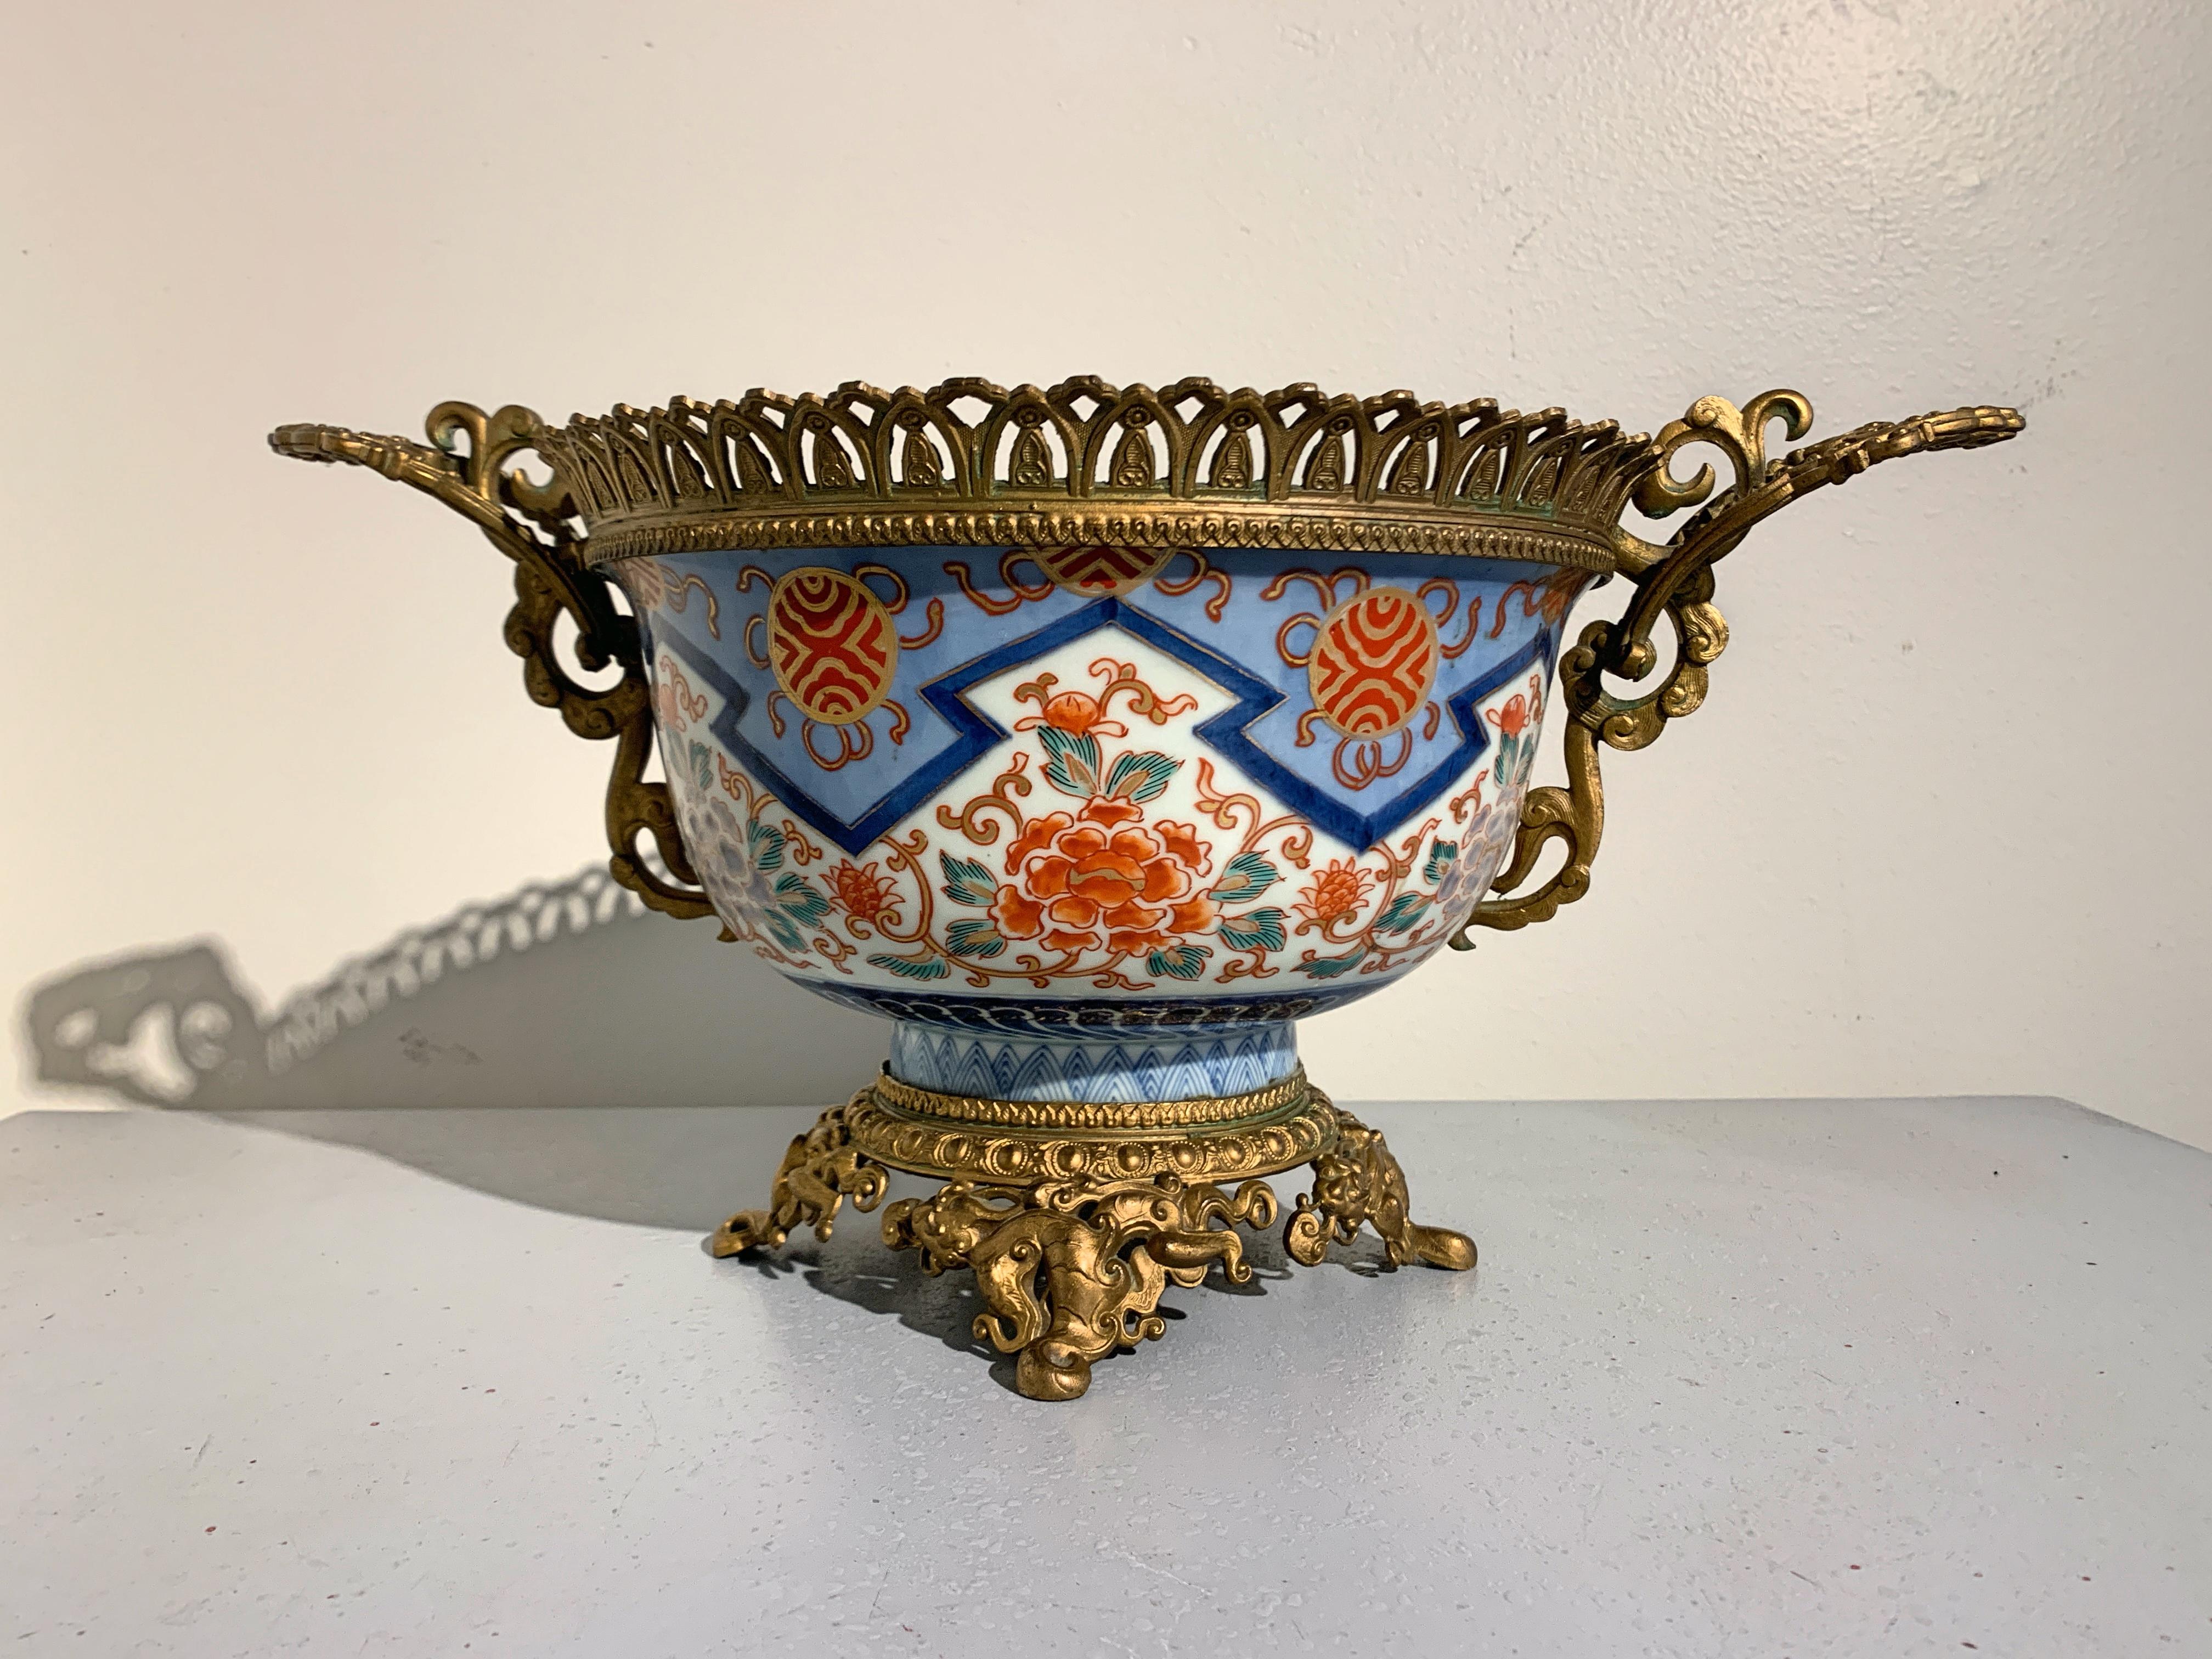 An elegant French Louis XVI style Japonisme centerpiece comprised of a large 19th century Meiji Period Japanese Imari Porcelain bowl with French gilt metal ormolu mounts, late 19th-early 20th century, France and Japan. 

The 19th century Meiji